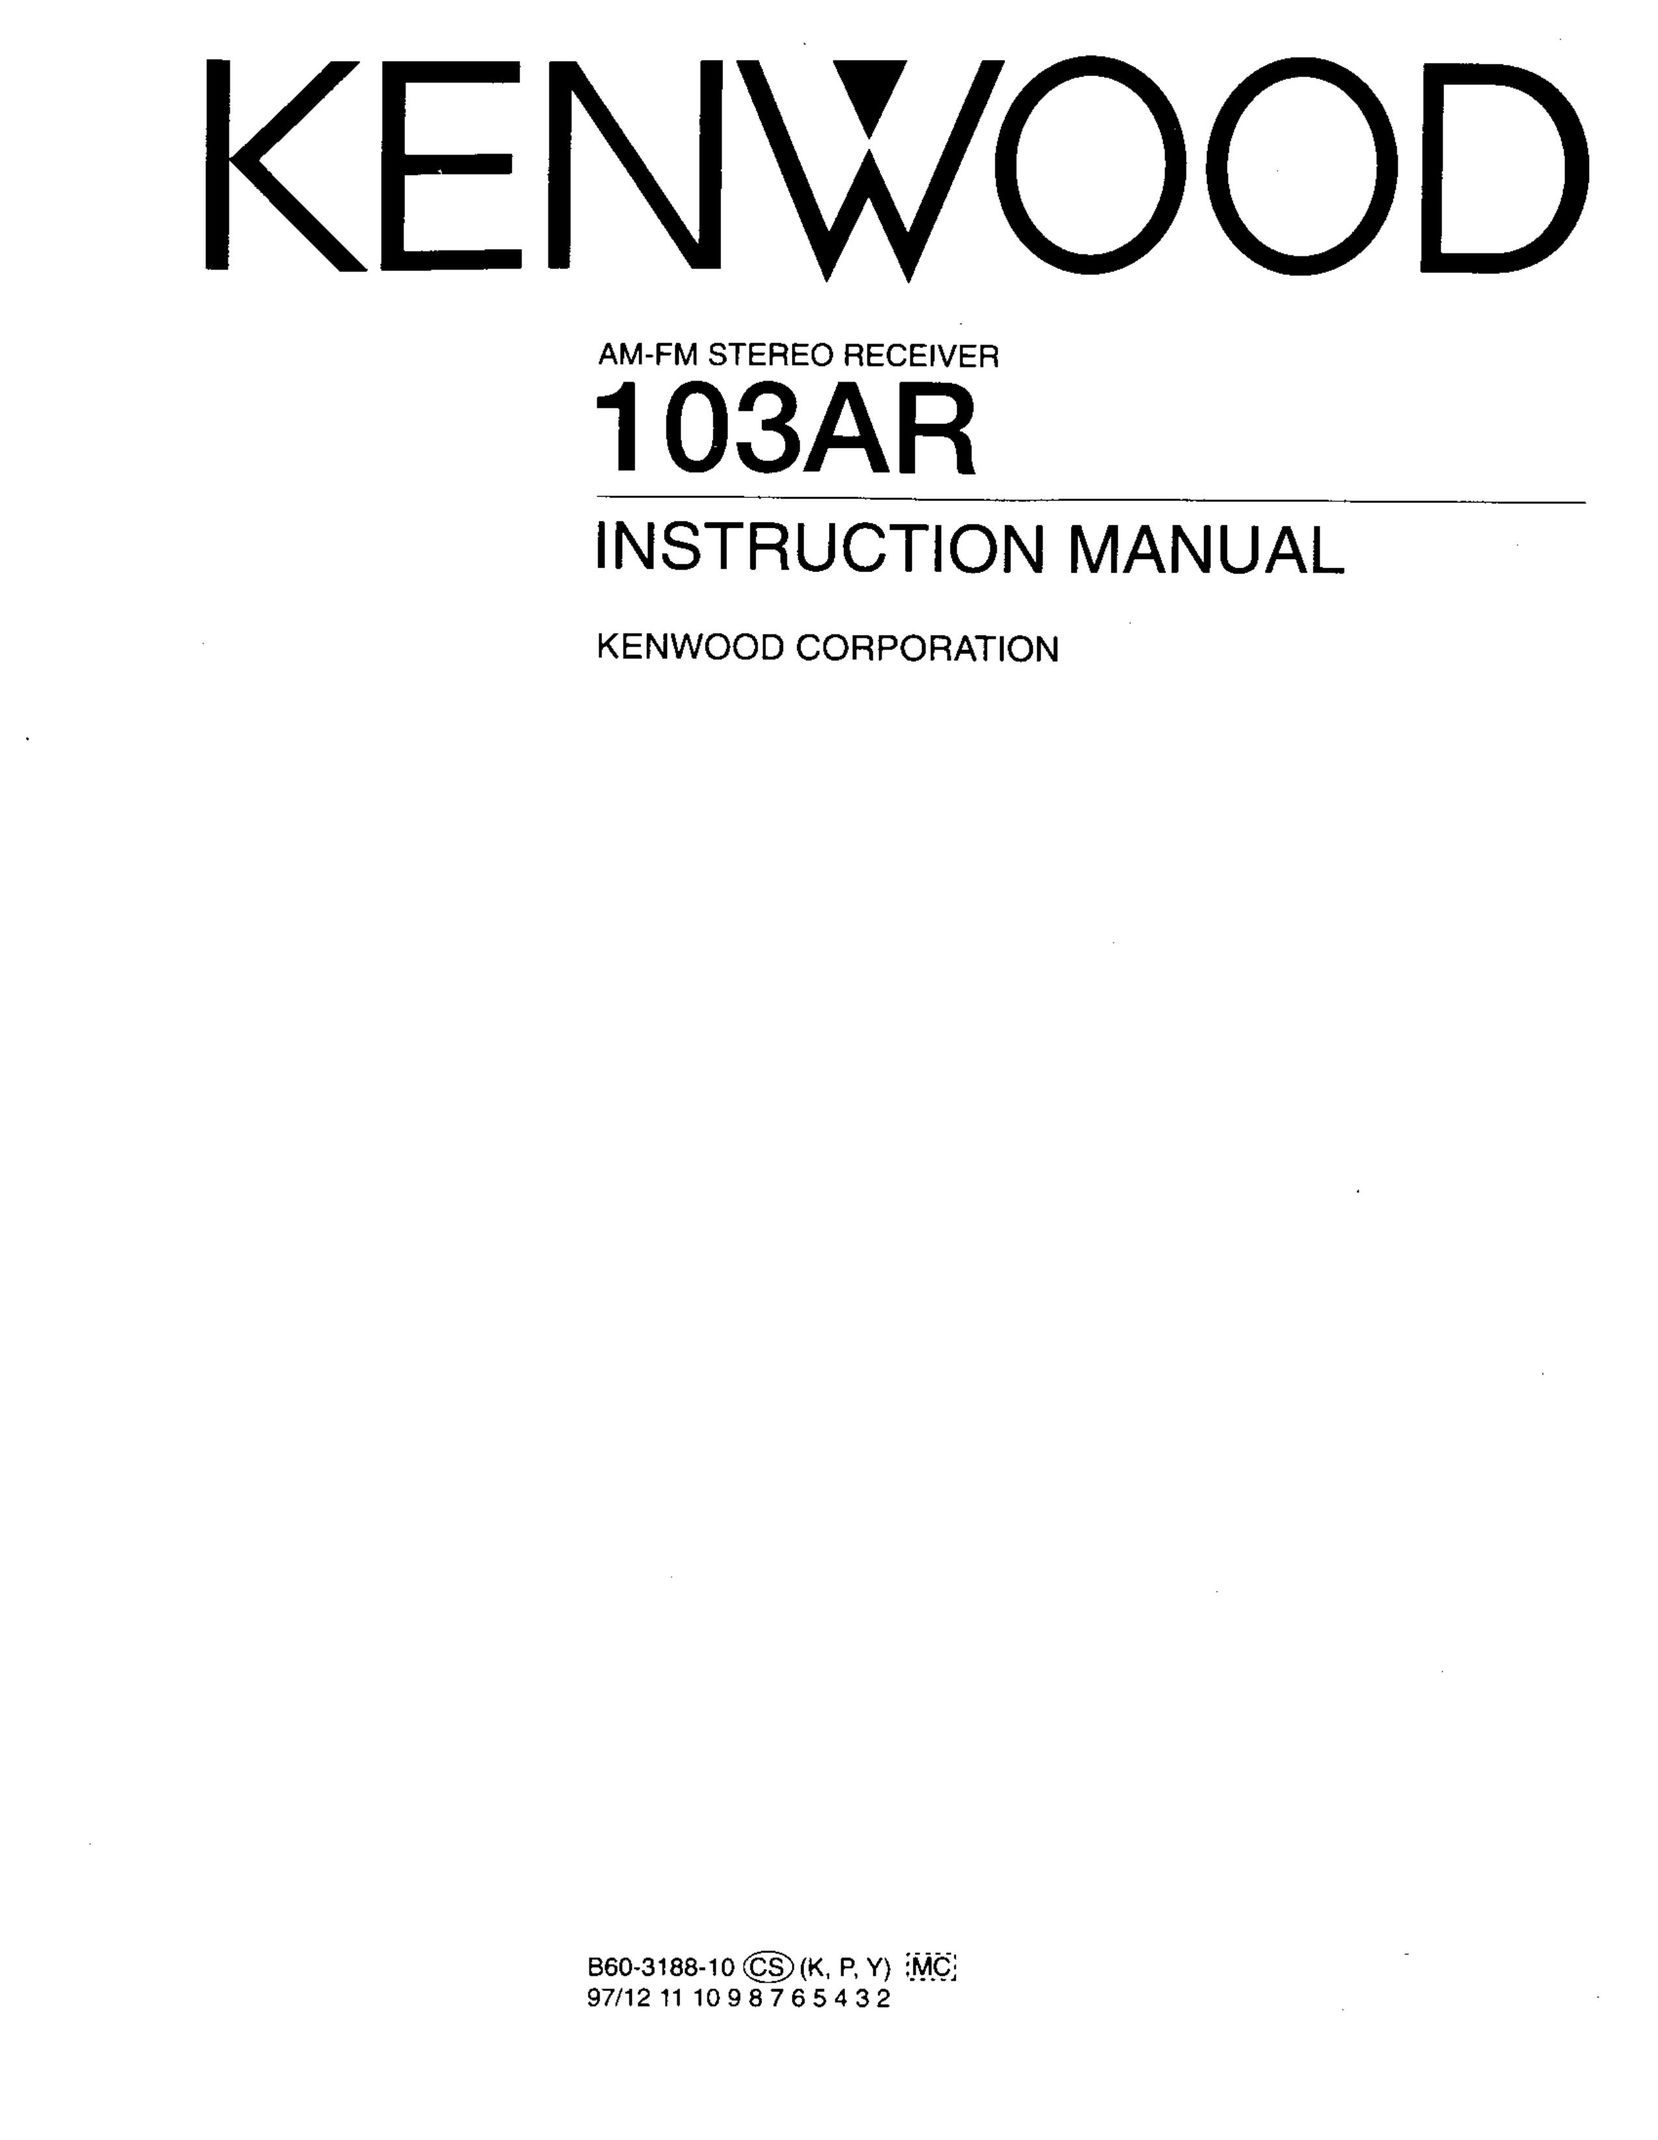 Kenwood 103AR Stereo Receiver User Manual